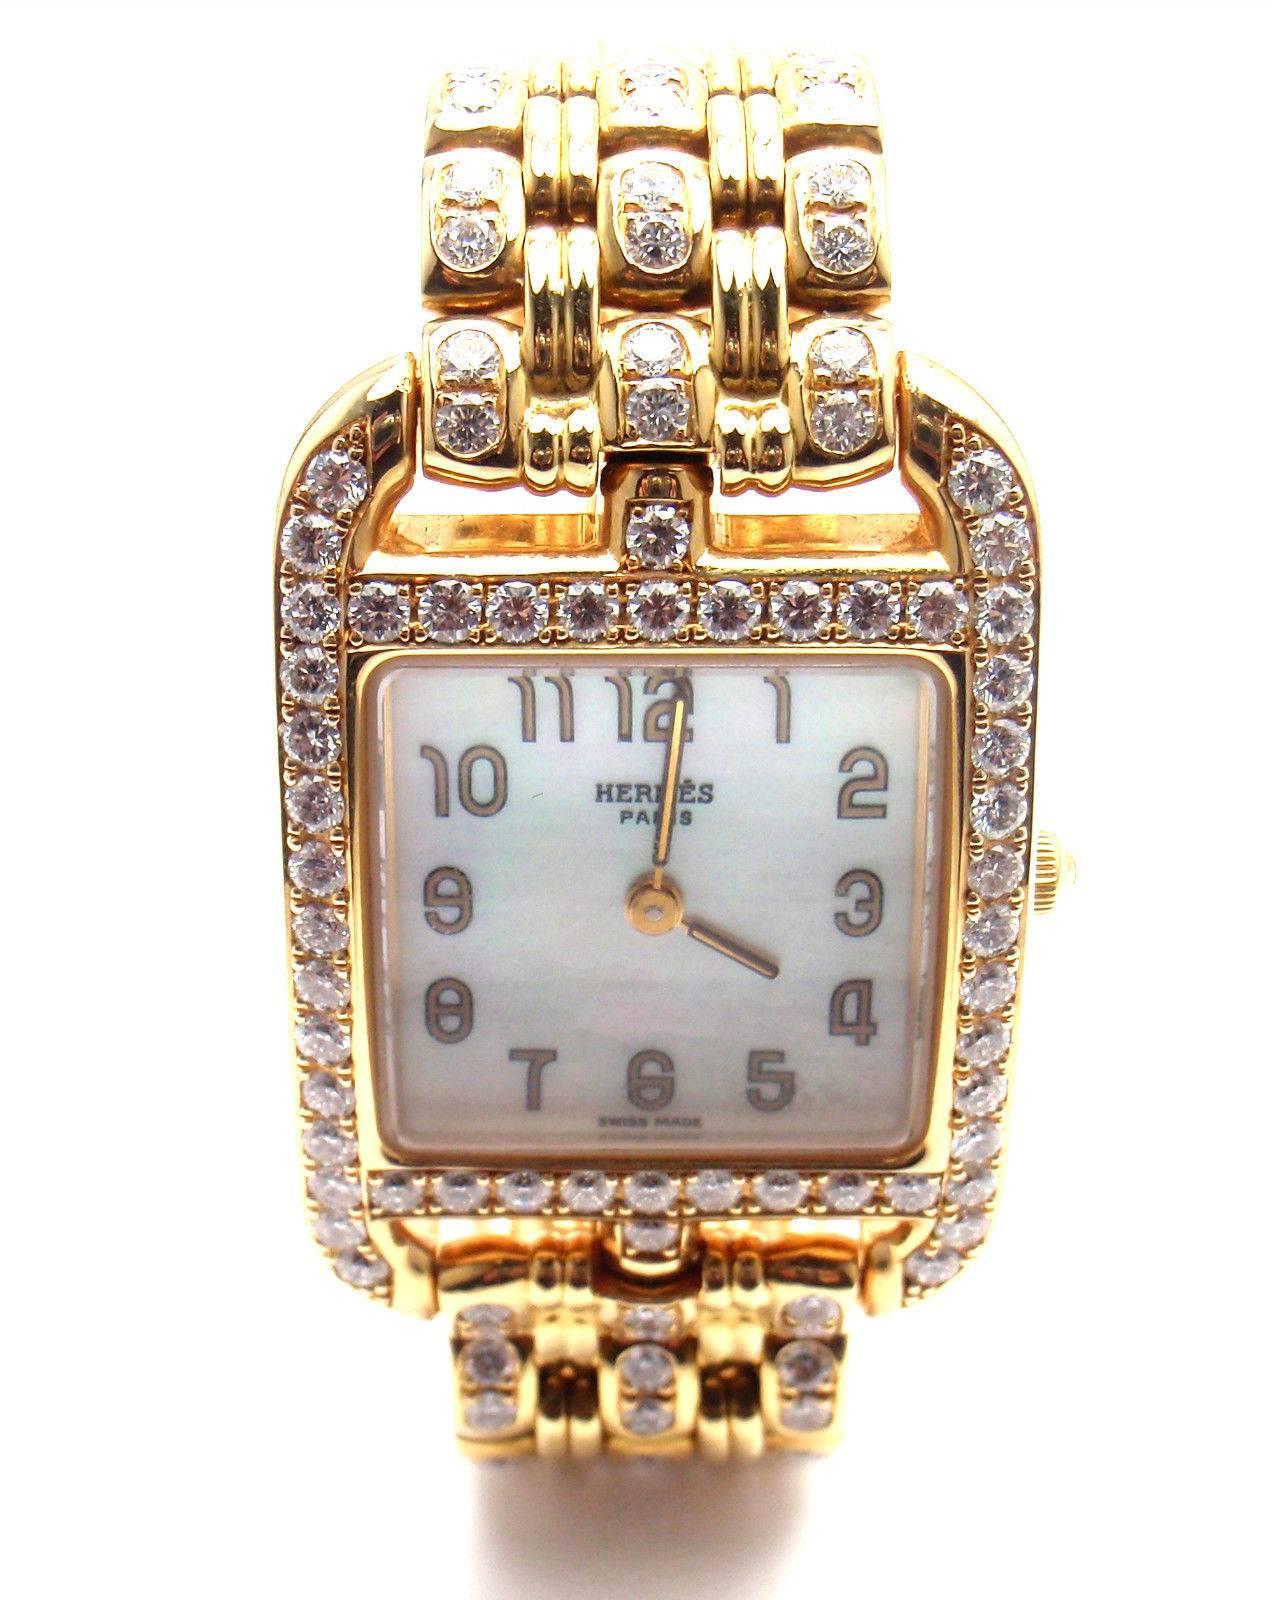 18k yellow gold diamond Cape Cod watch by Hermes. 
With 96 round brilliant cut diamonds VVS1 clarity, E color total weight approx. 1.92ct
Details: 
Style Number: Cape Cod
Reference Number:  CC1.289
Case Dimensions:  23mm x 23mm
Movement: Quartz
Case